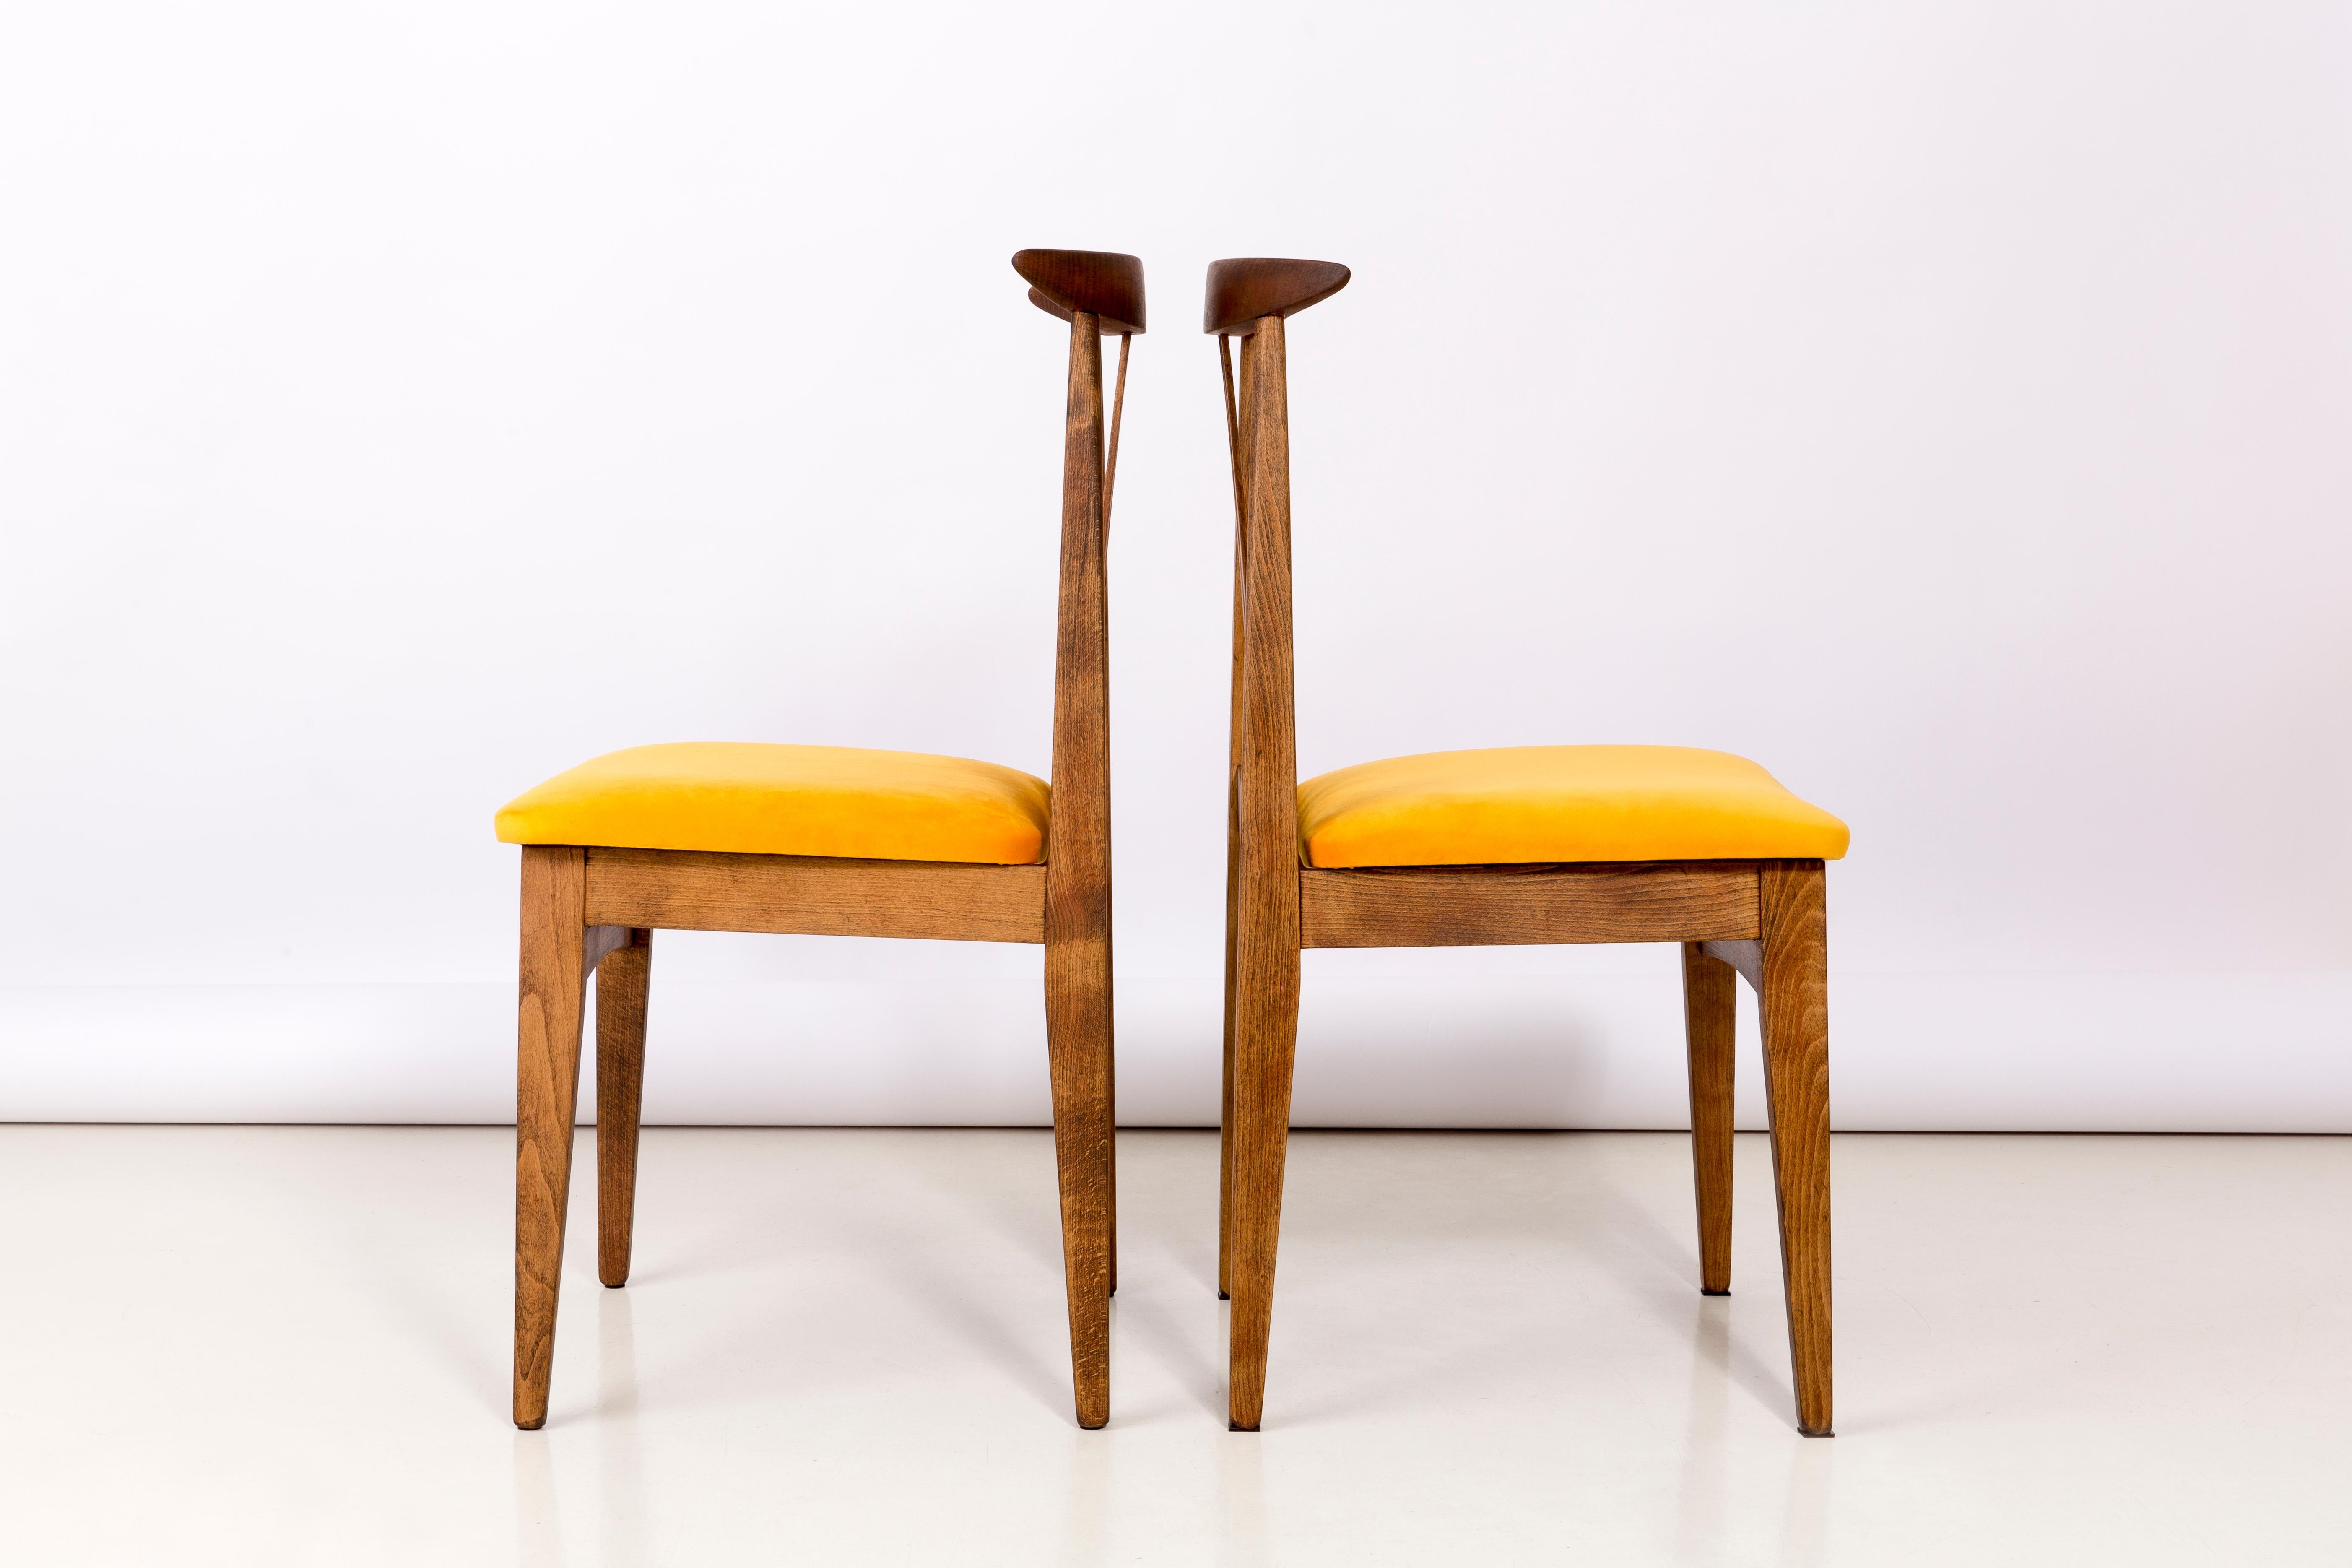 Set of two beech chairs designed by M. Zielinski, type 200 / 100B. Manufactured by the Opole Furniture Industry Center at the end of the 1960s in Poland. The chairs have undergone a complete carpentry and upholstery renovation. Seats covered with